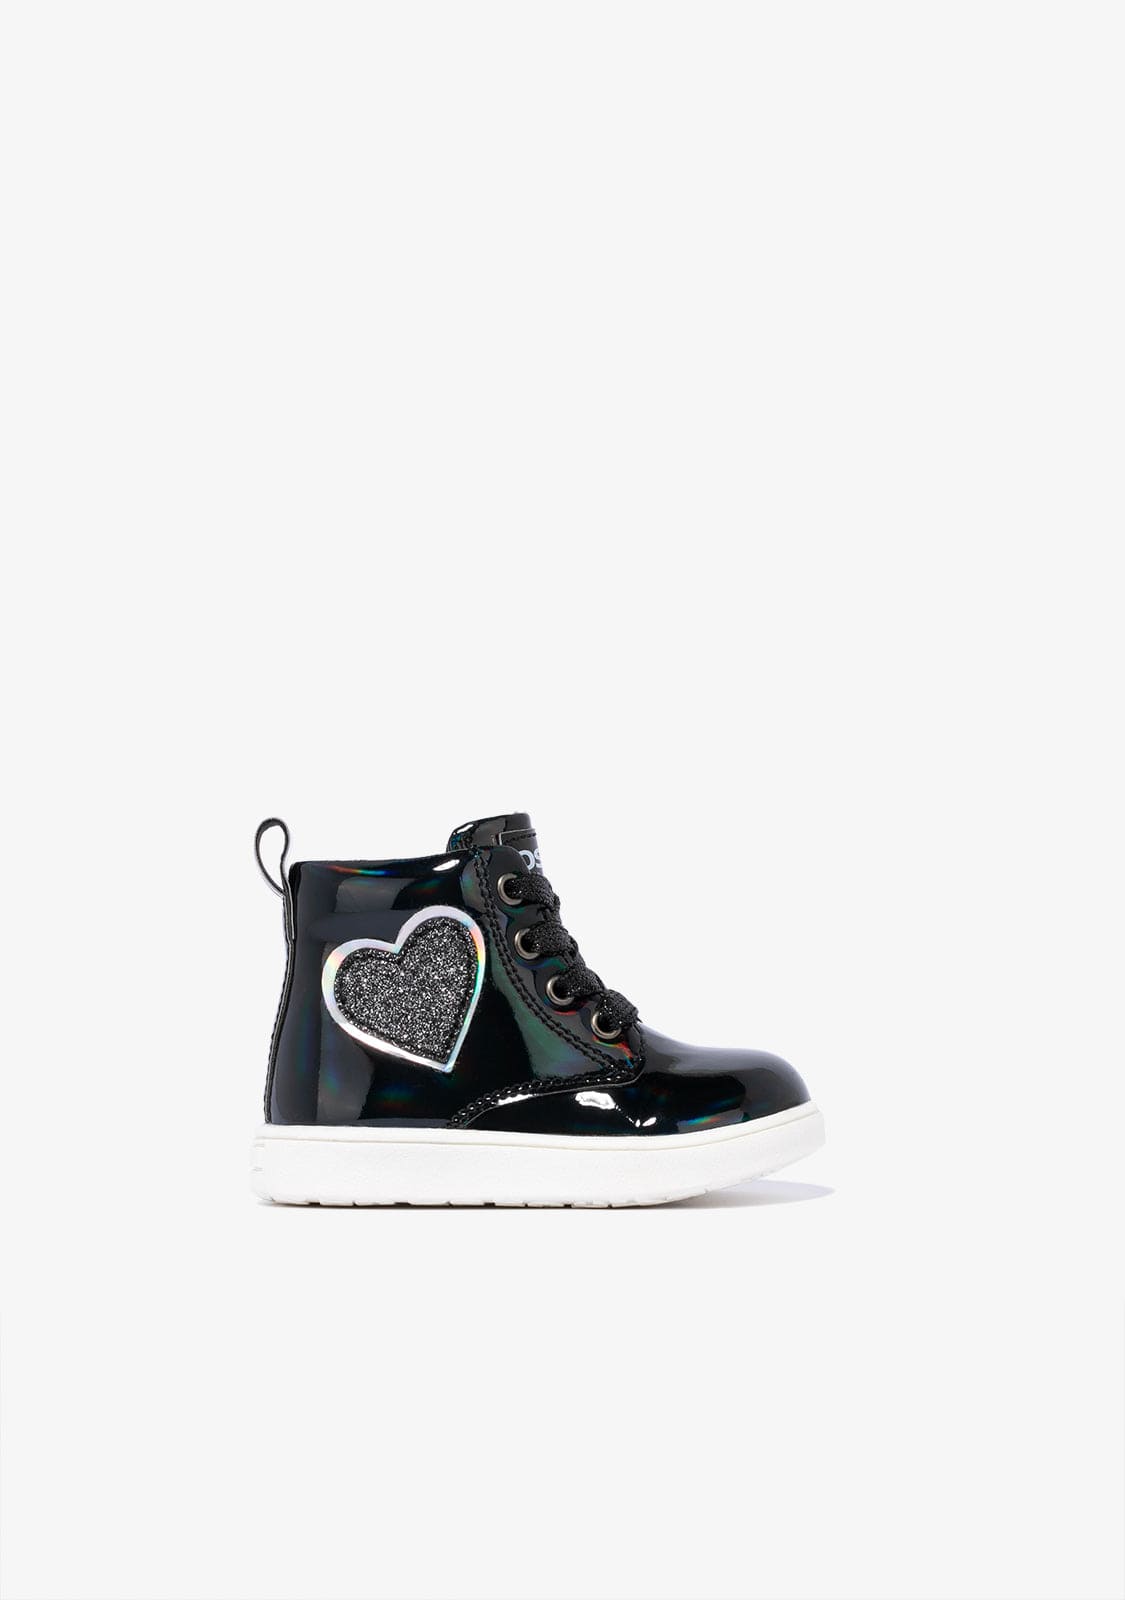 OSITO Shoes Baby's Black Mirror Patent Ankle Boots With Glitter Heart